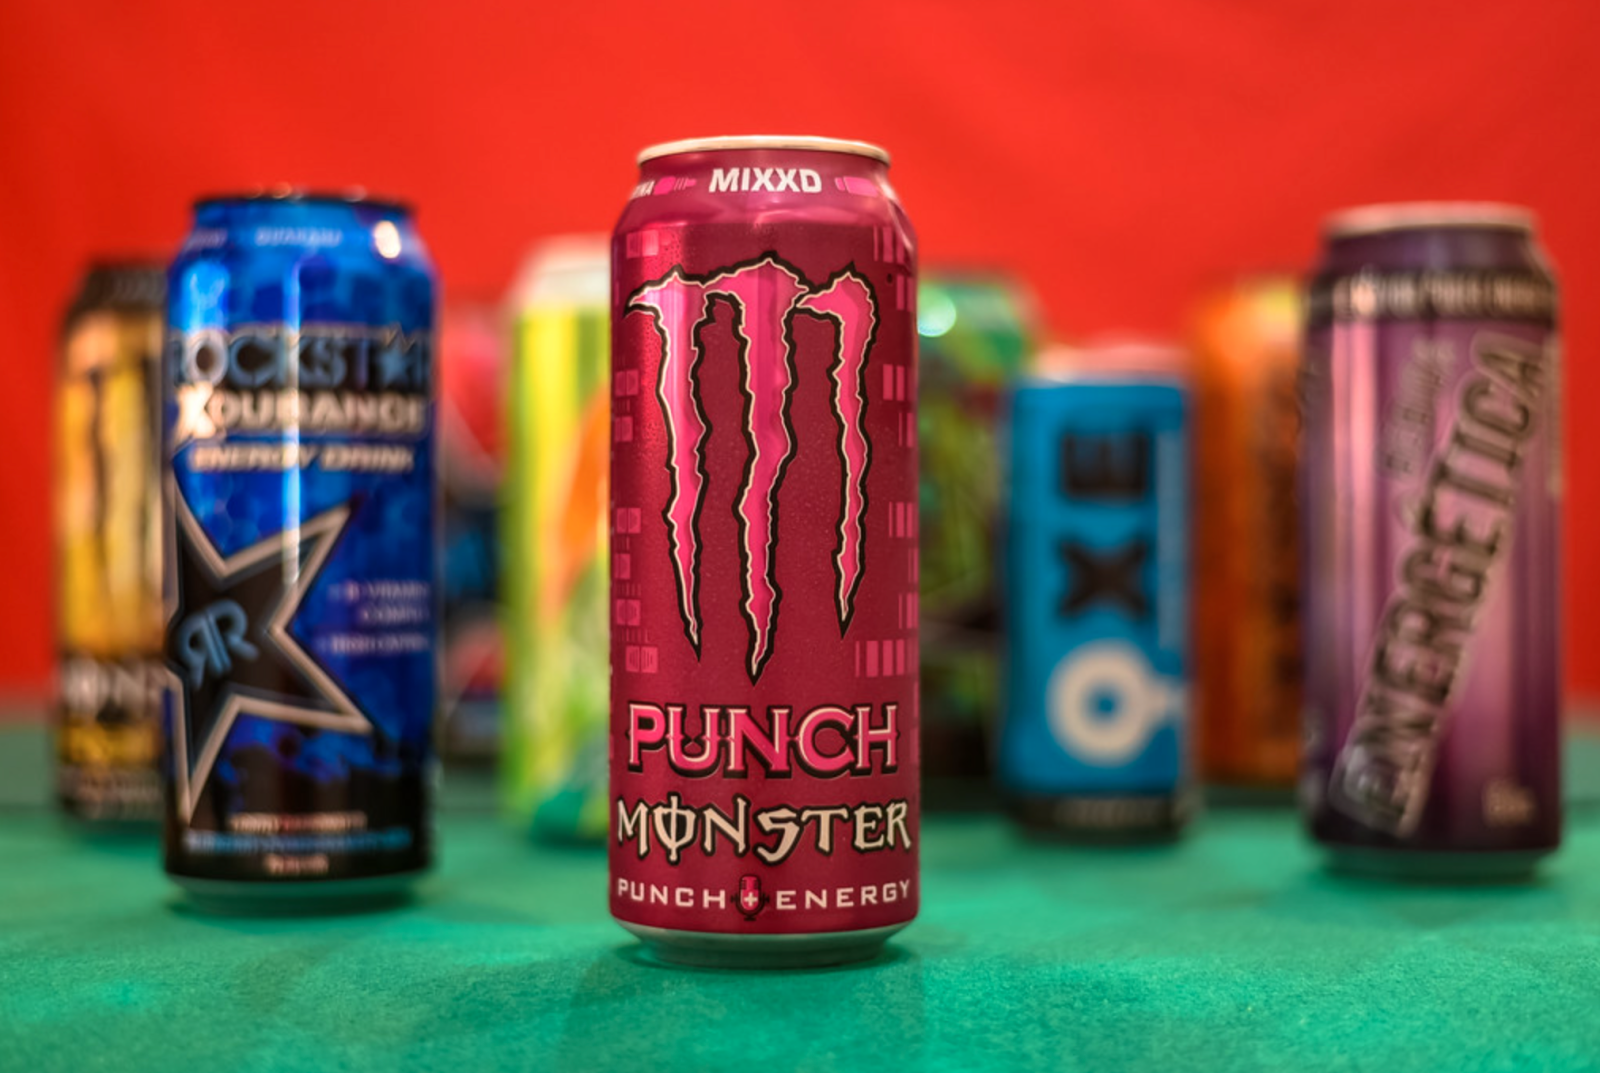 Up to a third of teens in the UK found to consume energy drinks weekly, The Manc